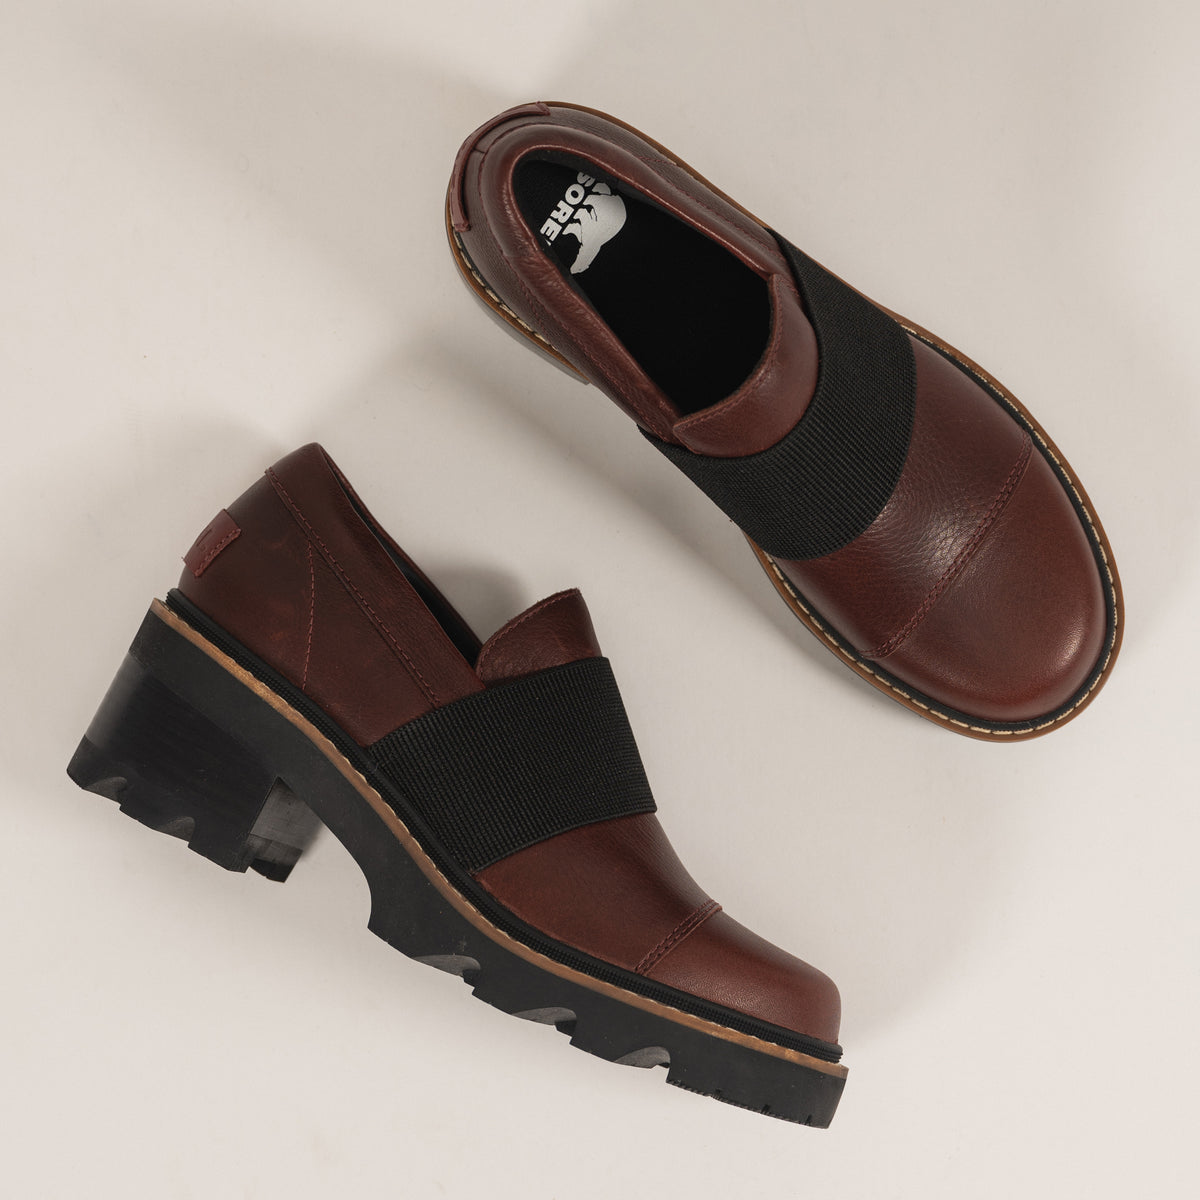 JOAN NOW LOAFER - SPICE - LEATHER